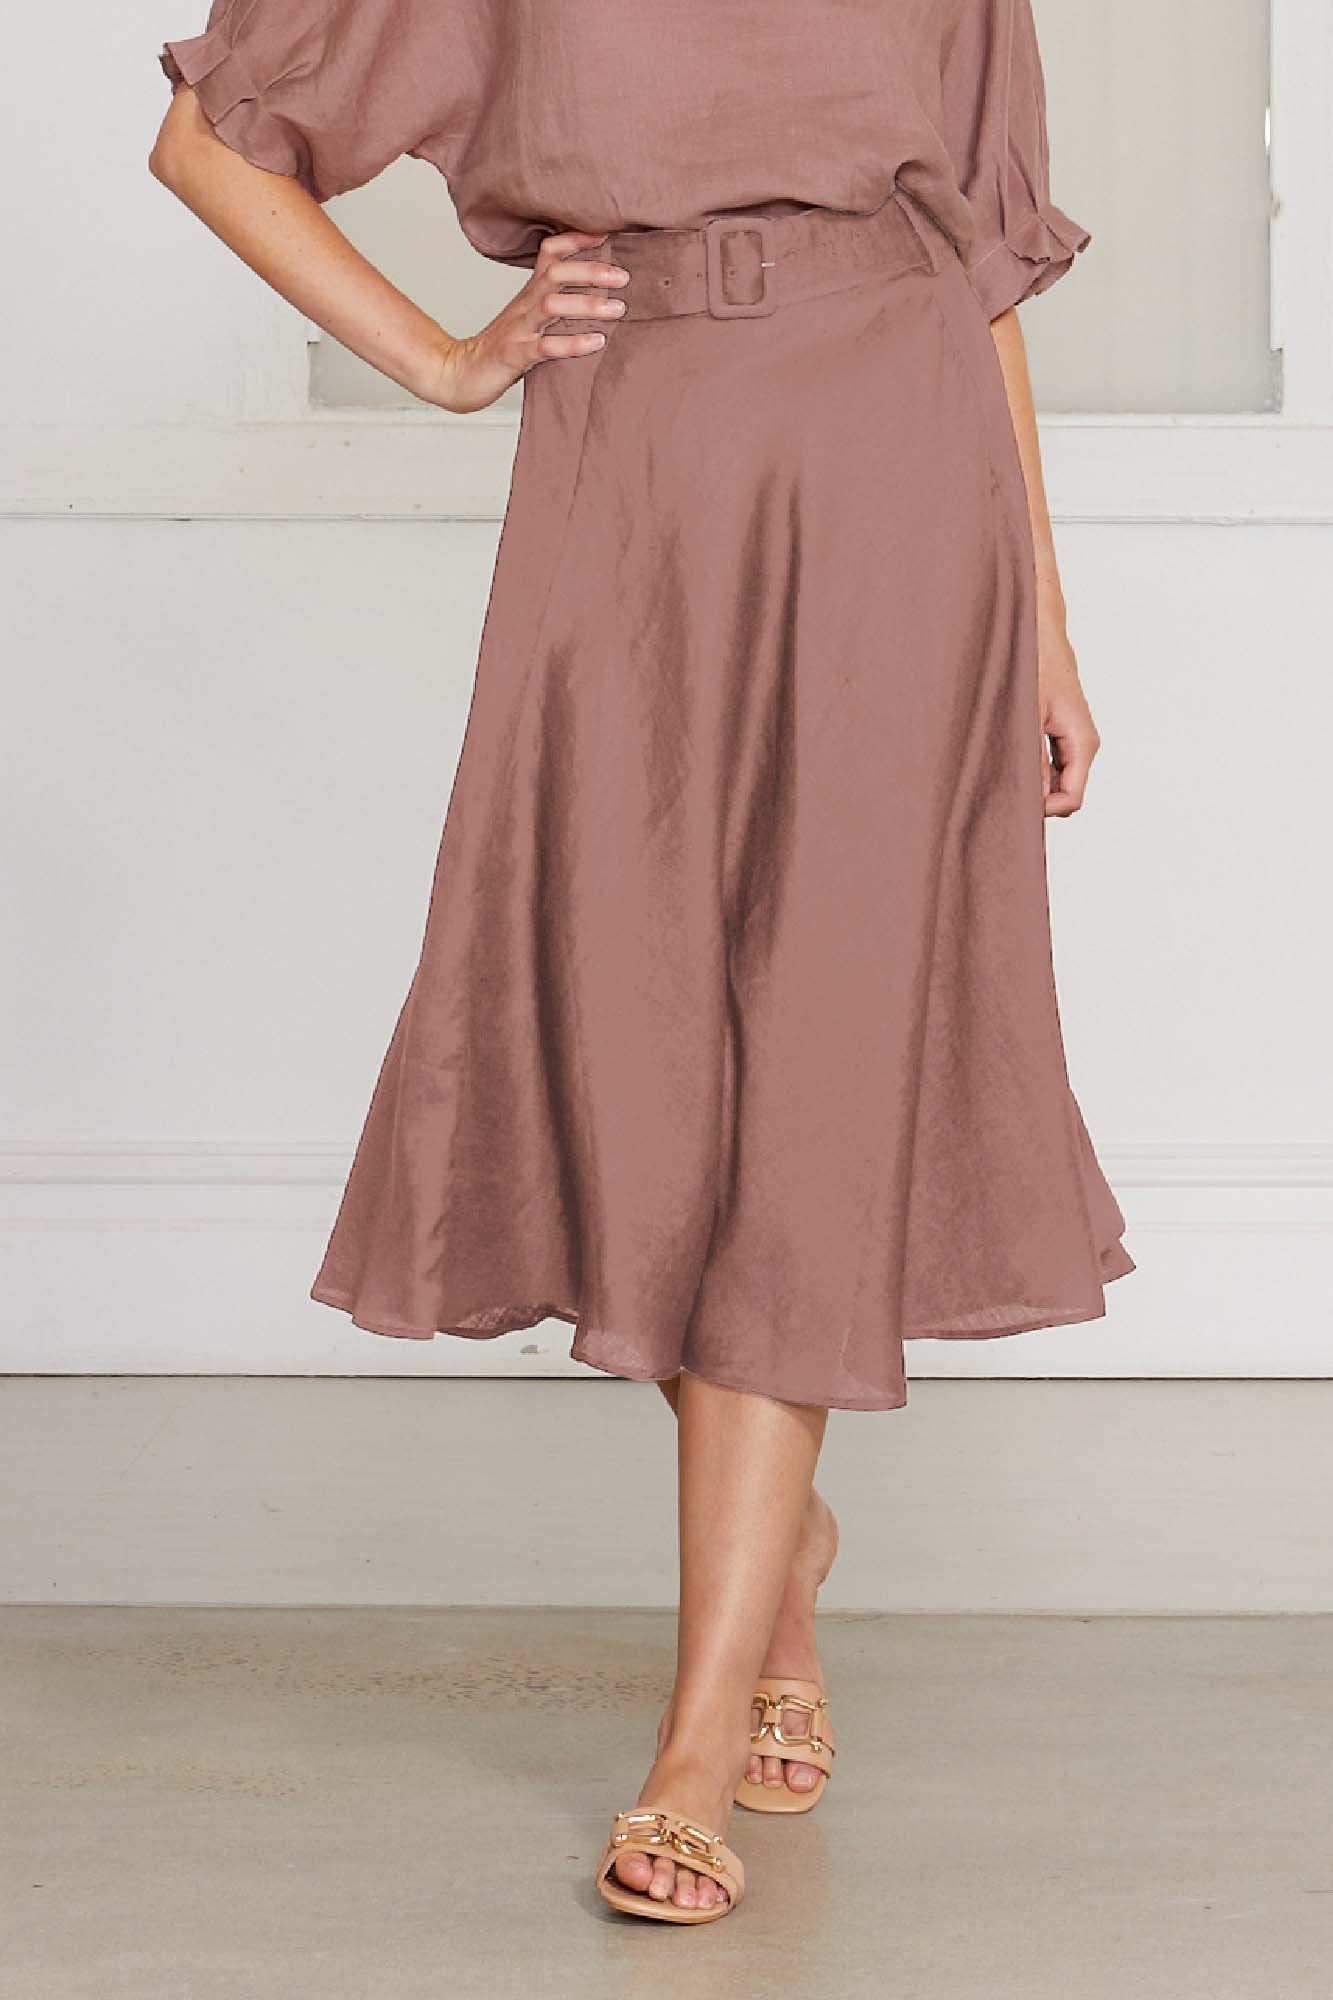 Fate + Becker Love Is Skirt in Smoked Pearl - Hey Sara